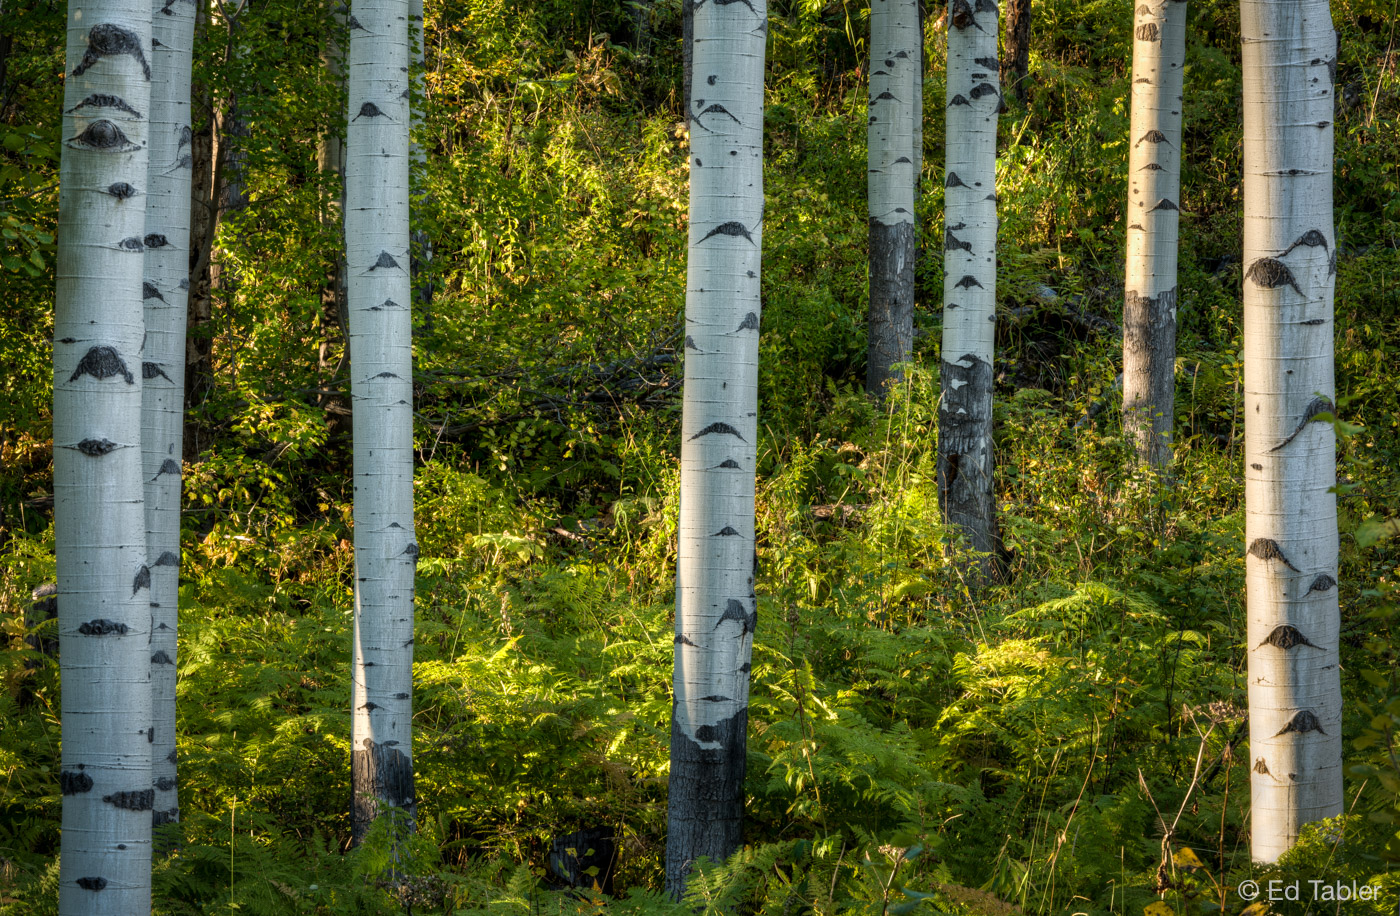 Aspen at sunset on McClure Pass. One of the most peaceful places I've ever visited. I stood still for literally hours at this...